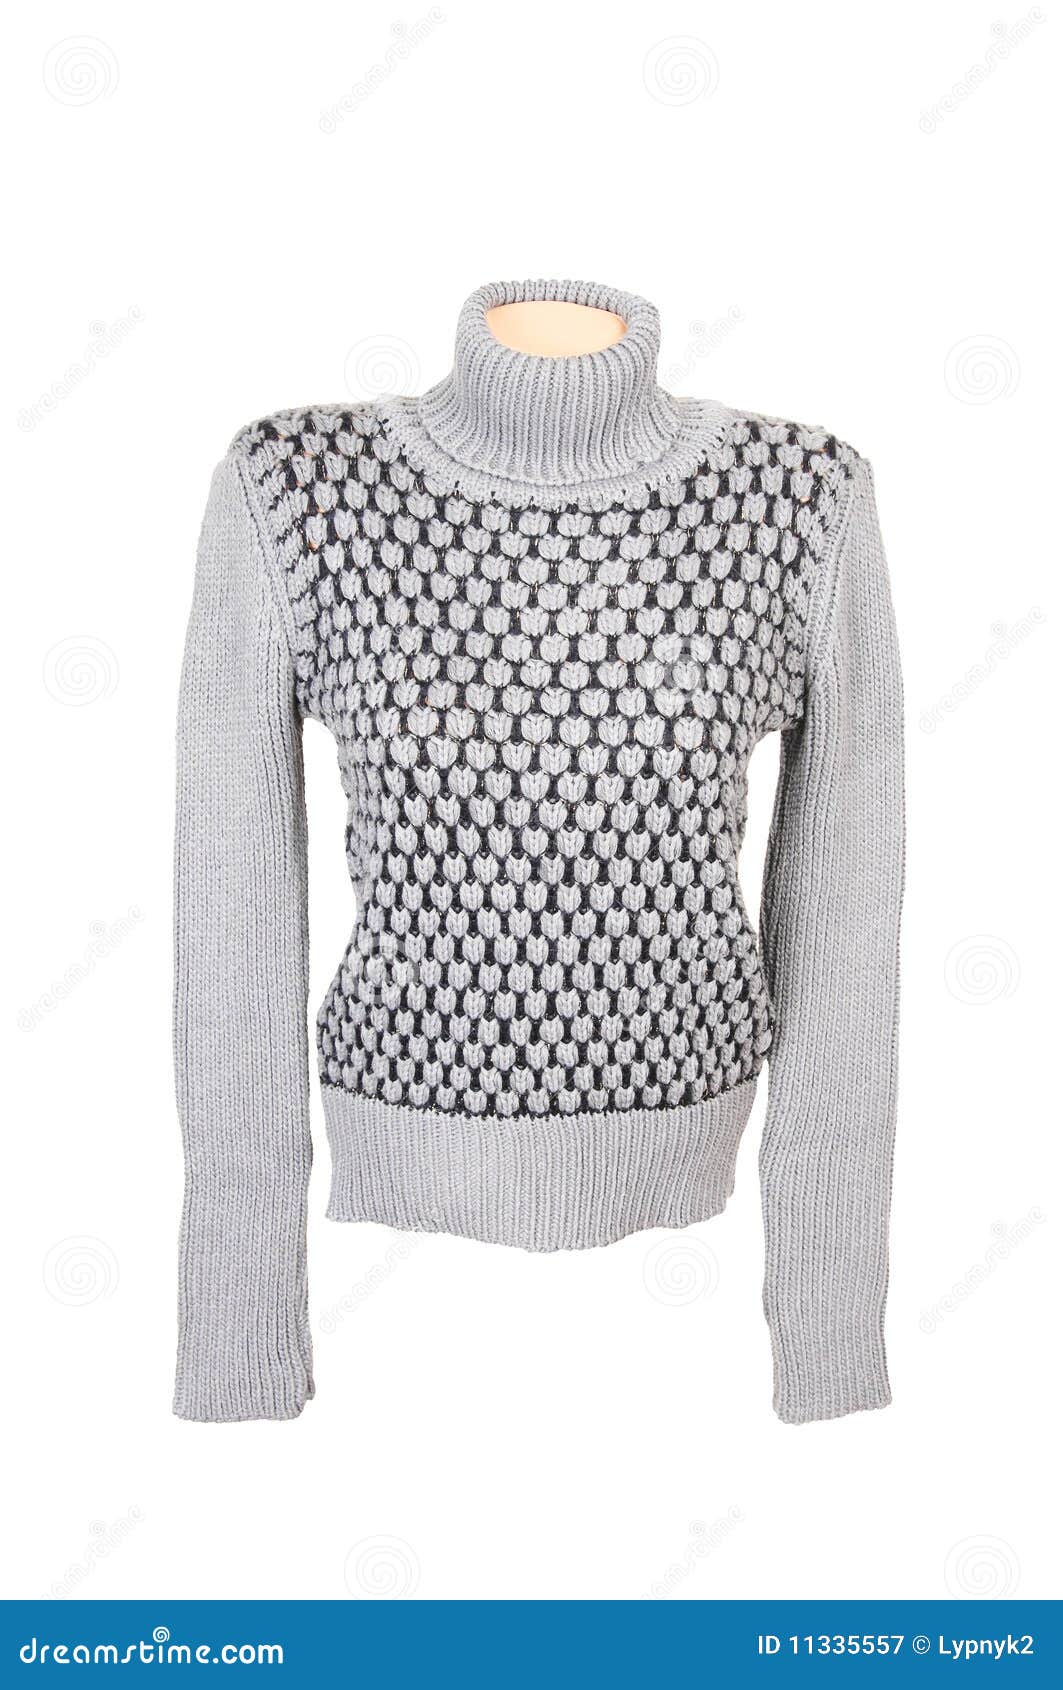 Grey Stylish Sweater on a White. Stock Image - Image of material ...